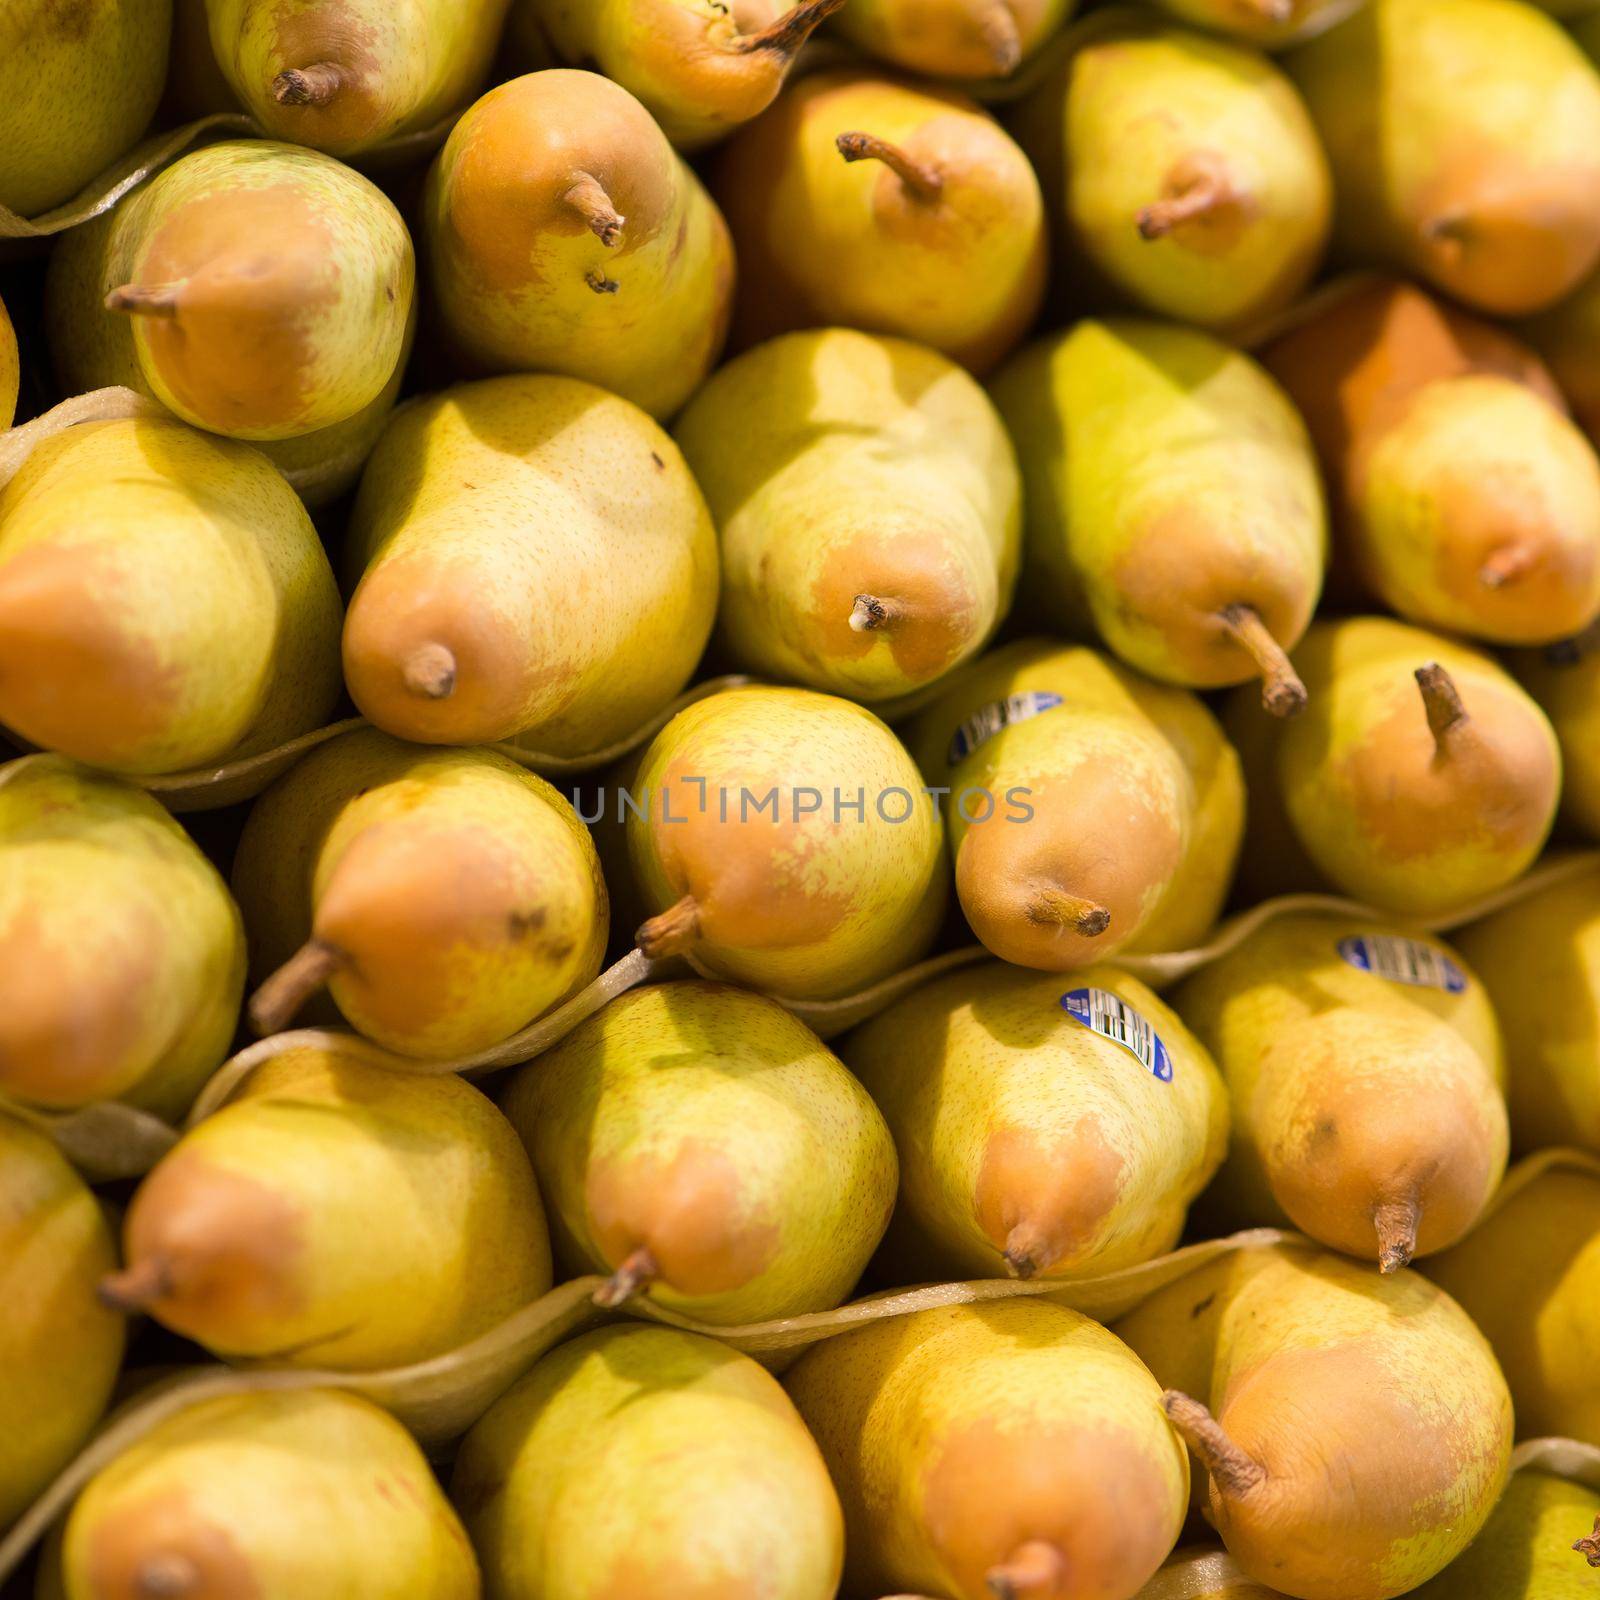 Pears at the market by tan4ikk1